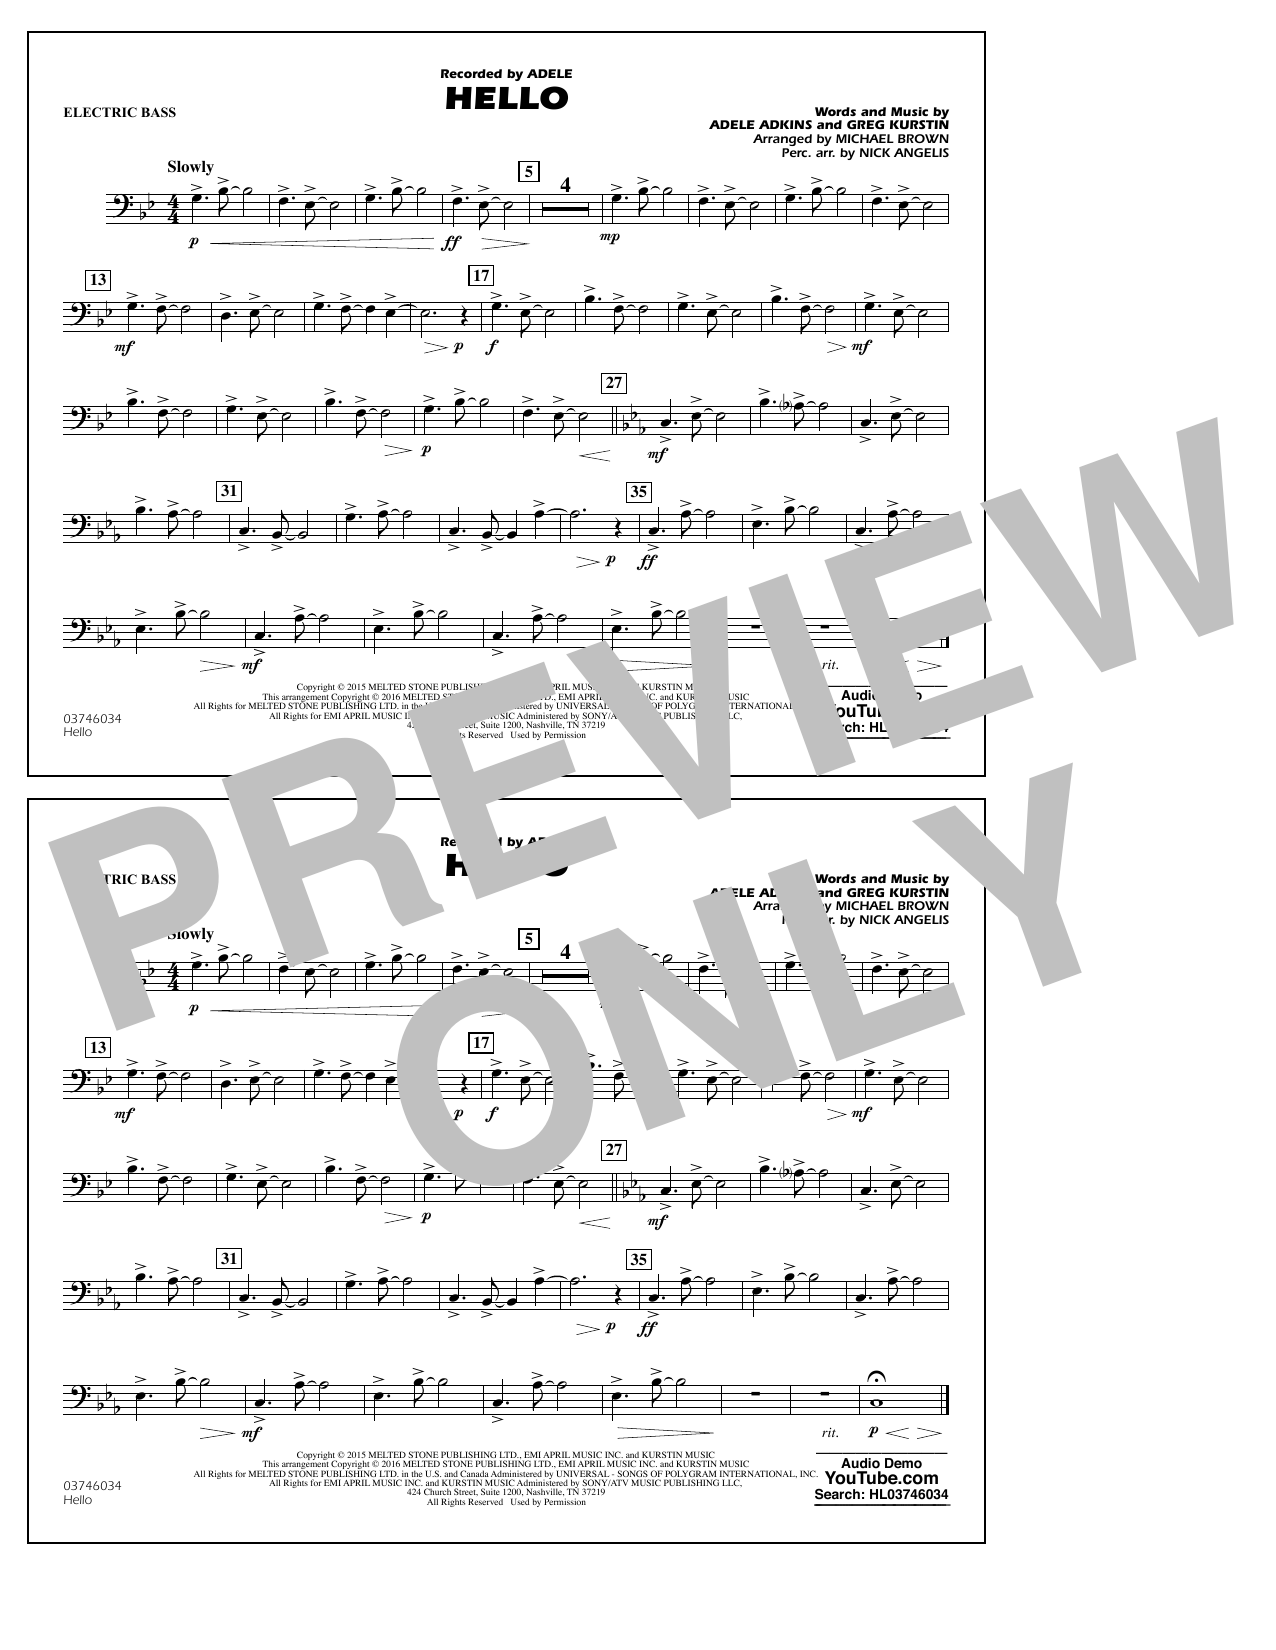 Download Michael Brown Hello - Electric Bass Sheet Music